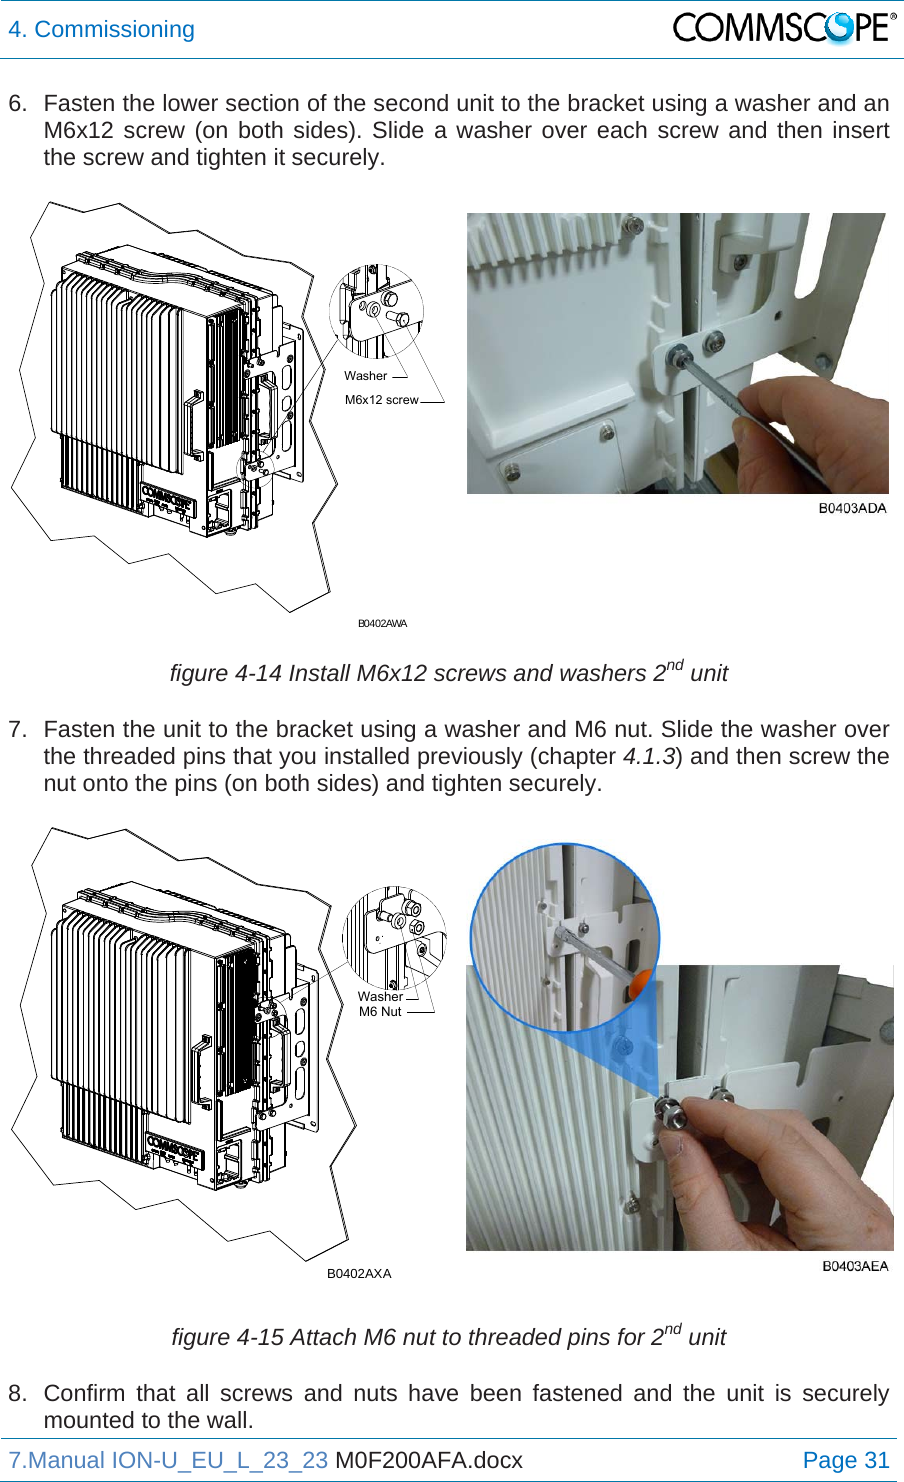 4. Commissioning  7.Manual ION-U_EU_L_23_23 M0F200AFA.docx Page 31 6.  Fasten the lower section of the second unit to the bracket using a washer and an M6x12 screw (on both sides). Slide a washer over each screw and then insert the screw and tighten it securely.  figure 4-14 Install M6x12 screws and washers 2nd unit 7.  Fasten the unit to the bracket using a washer and M6 nut. Slide the washer over the threaded pins that you installed previously (chapter 4.1.3) and then screw the nut onto the pins (on both sides) and tighten securely. figure 4-15 Attach M6 nut to threaded pins for 2nd unit 8.  Confirm that all screws and nuts have been fastened and the unit is securely mounted to the wall. M6x12 screwWasherB0402AWAWasherM6 NutB0402AXA